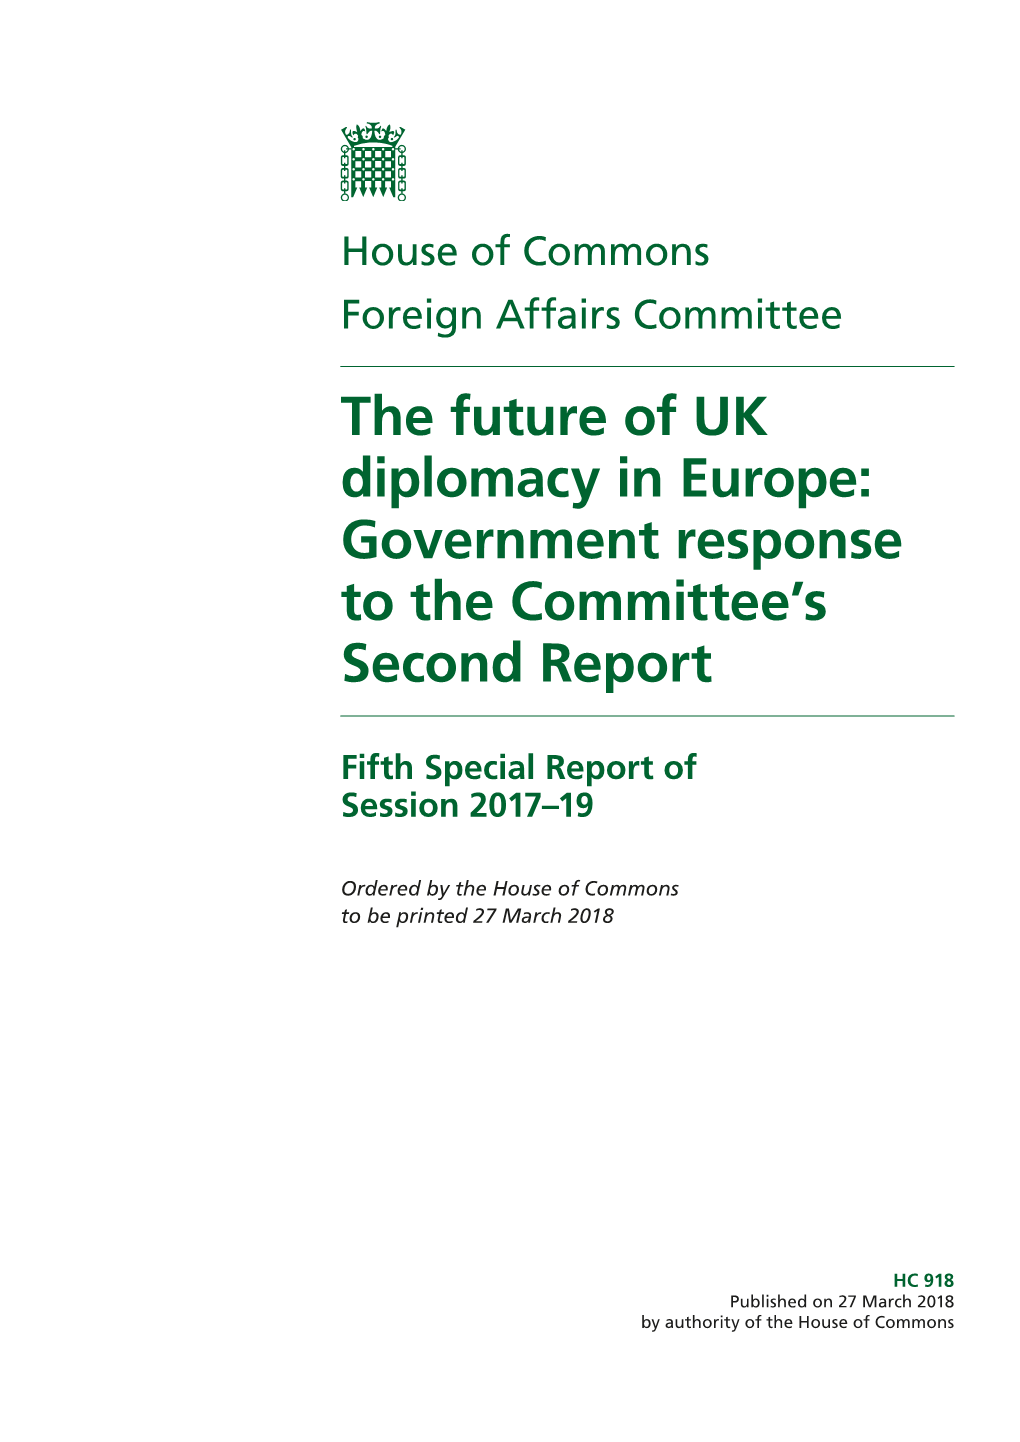 Government Response to the Committee's Second Report